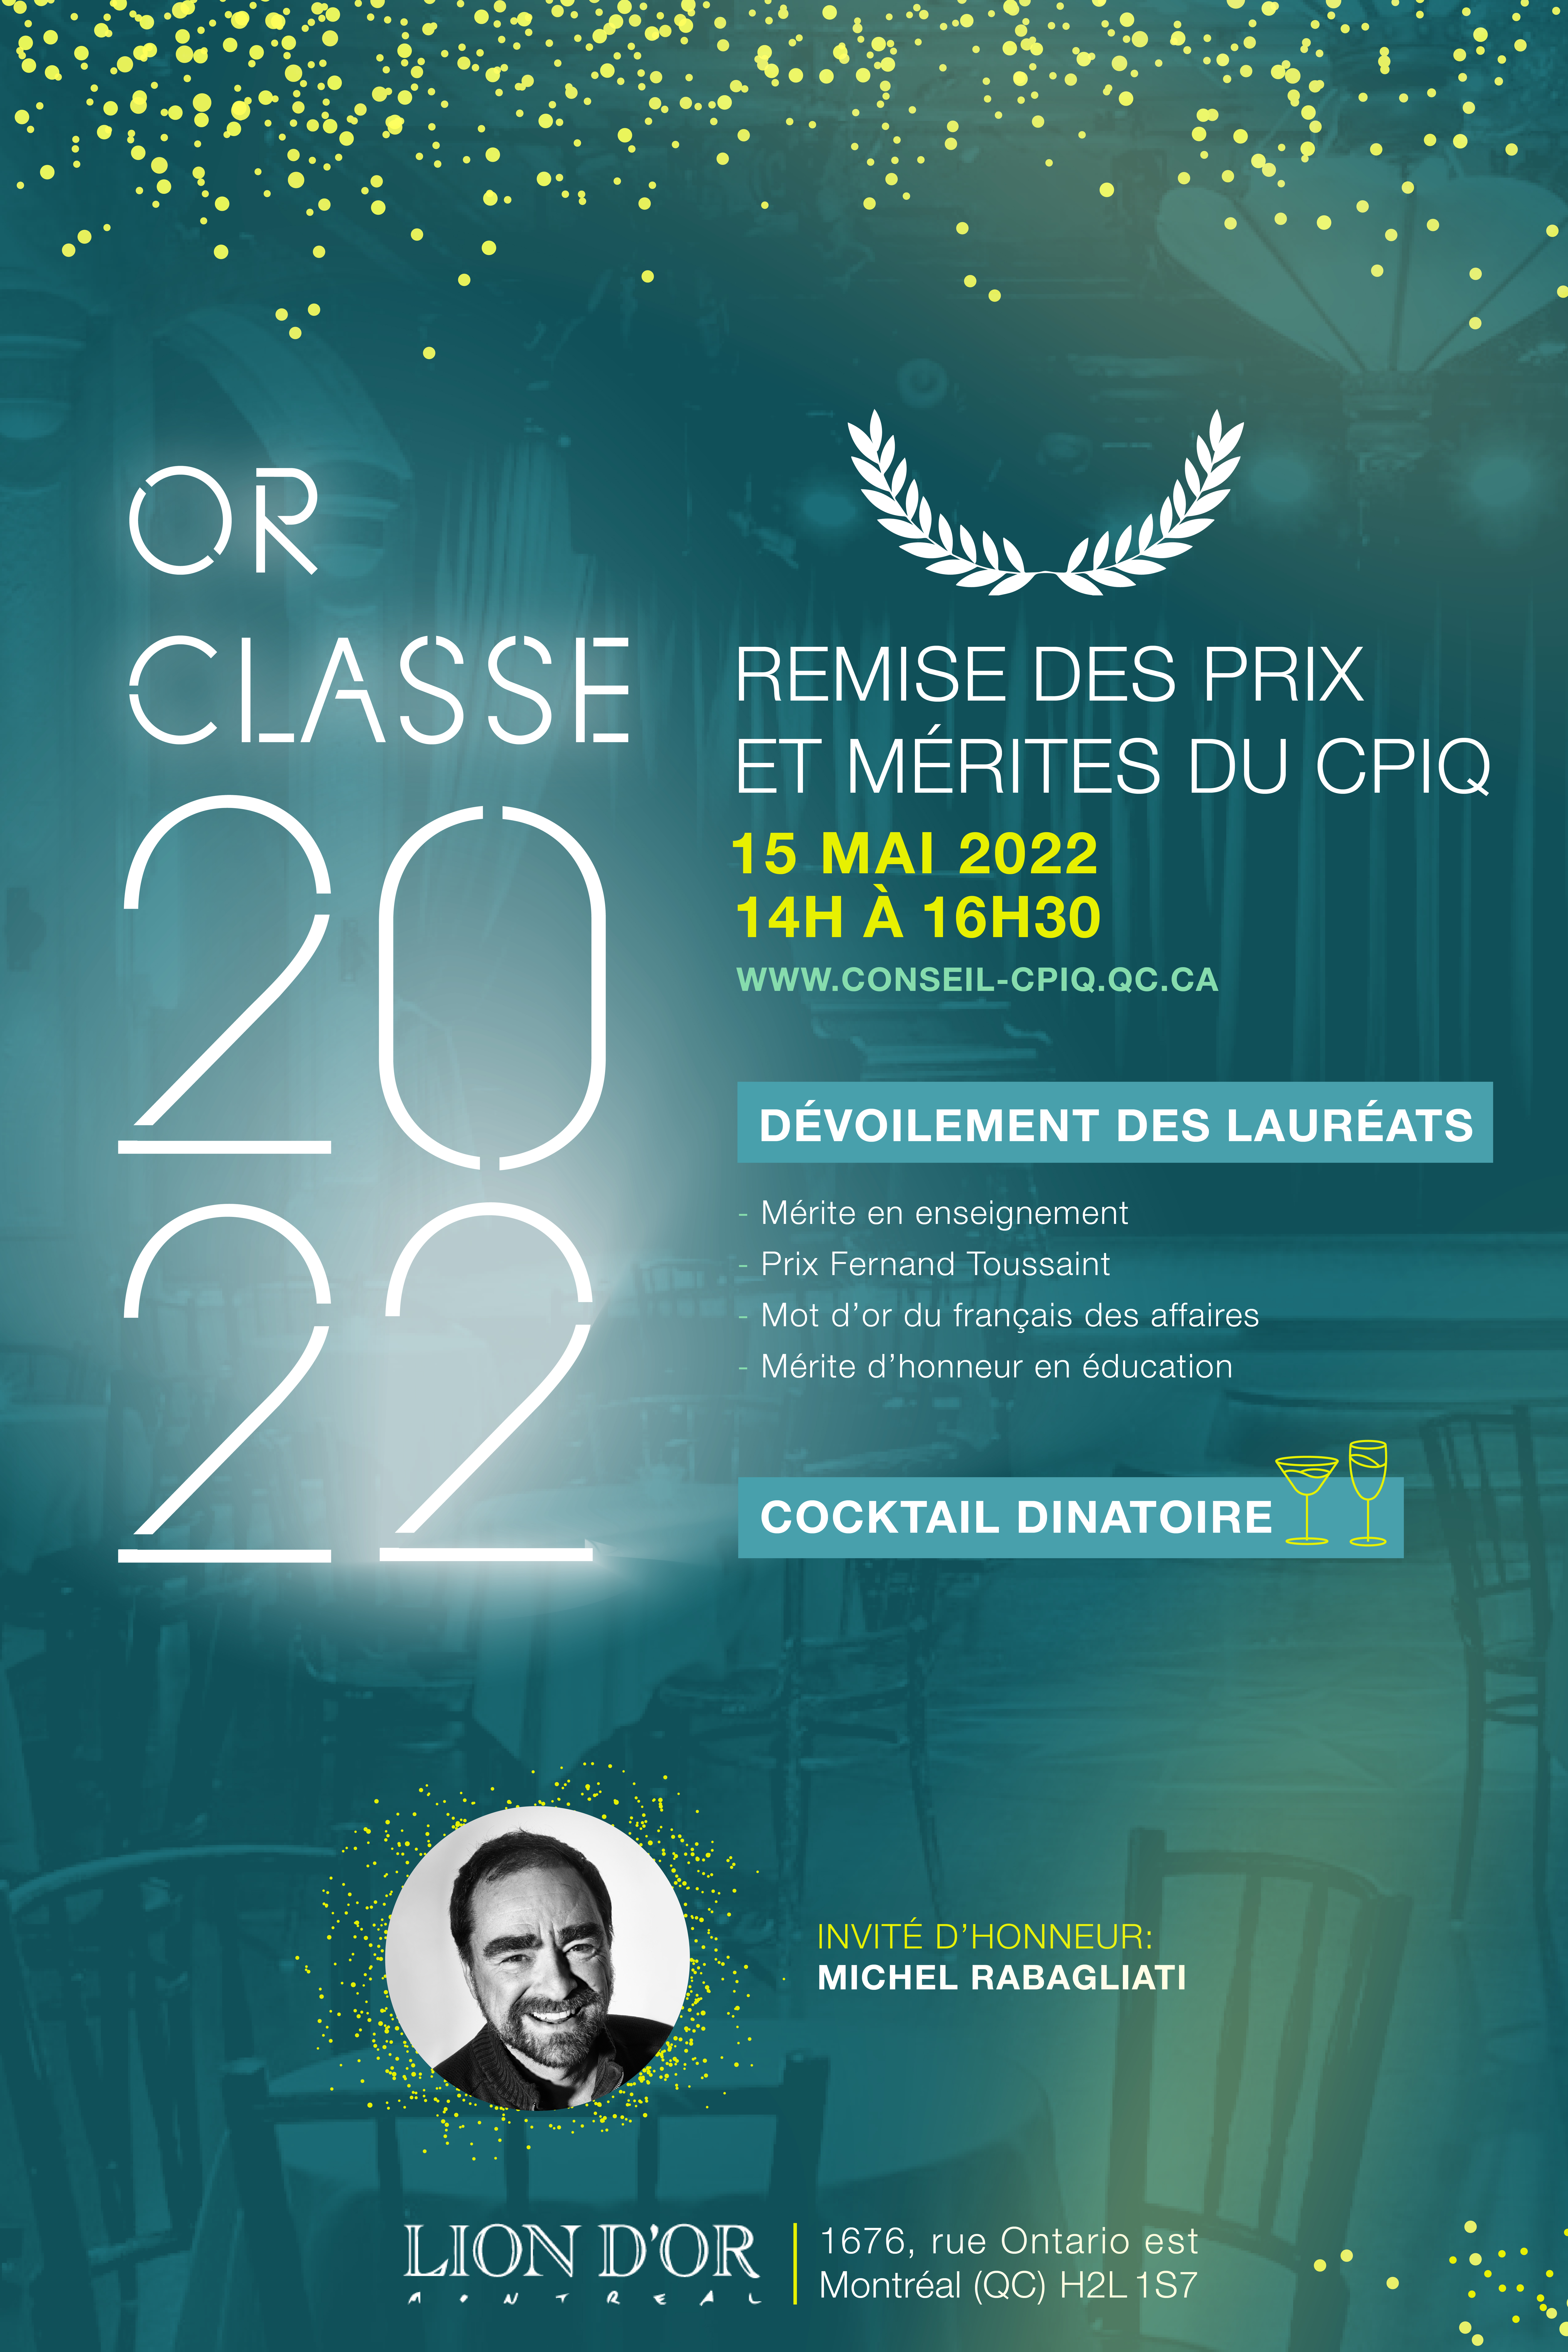 Or classe 2022